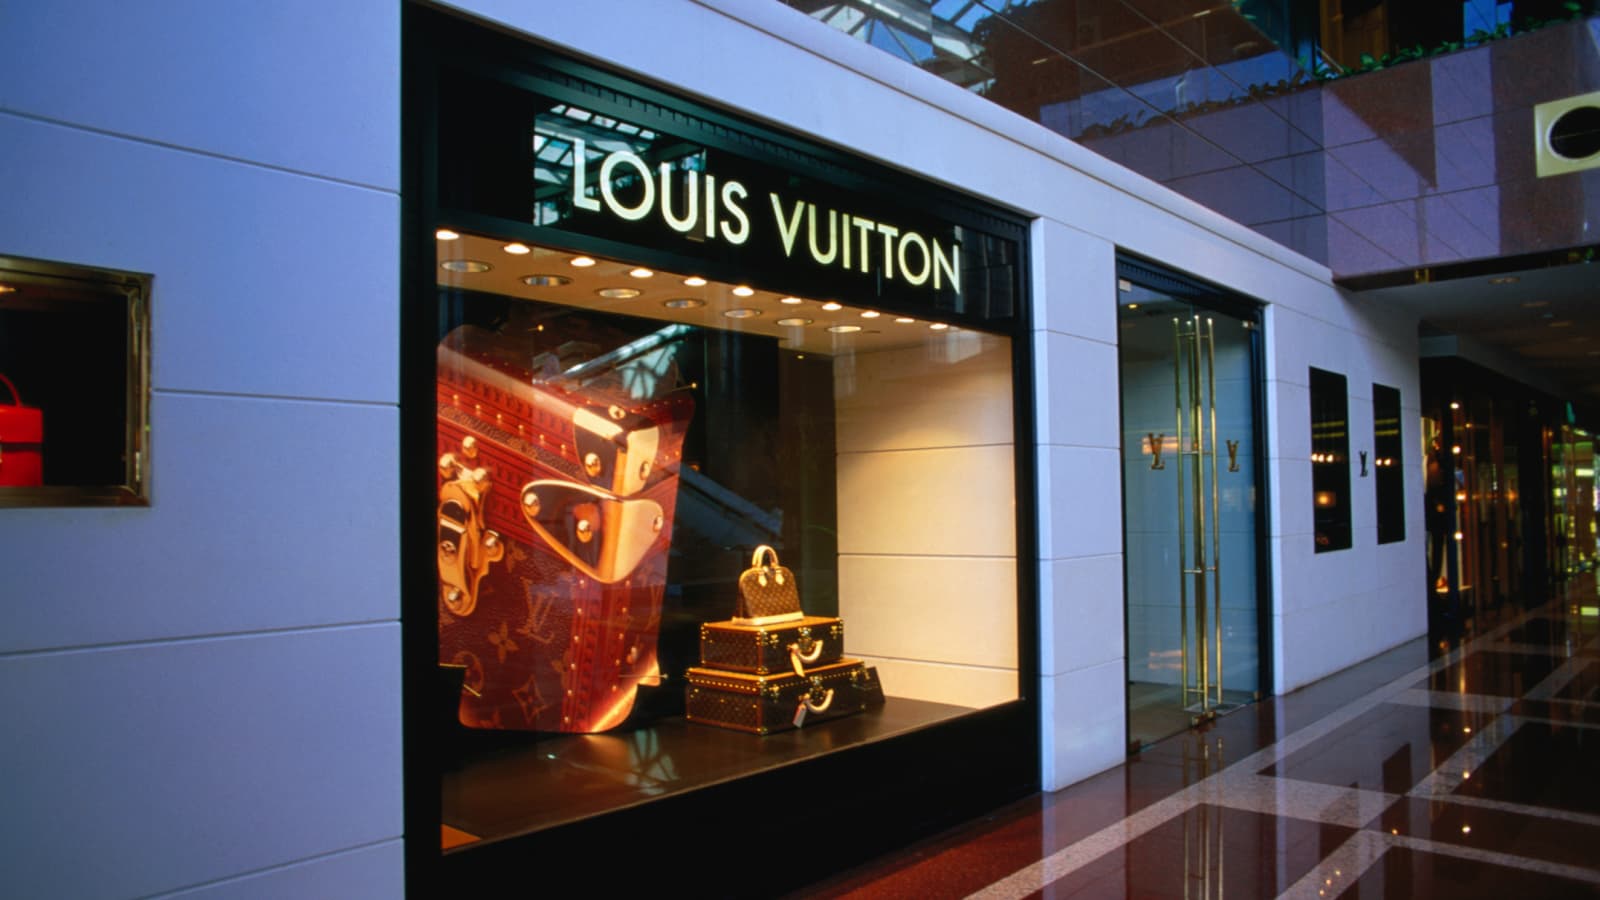 The Commercial Evolution of Louis Vuitton: Is It Losing Its Luxury Luster?  - Live Trading News